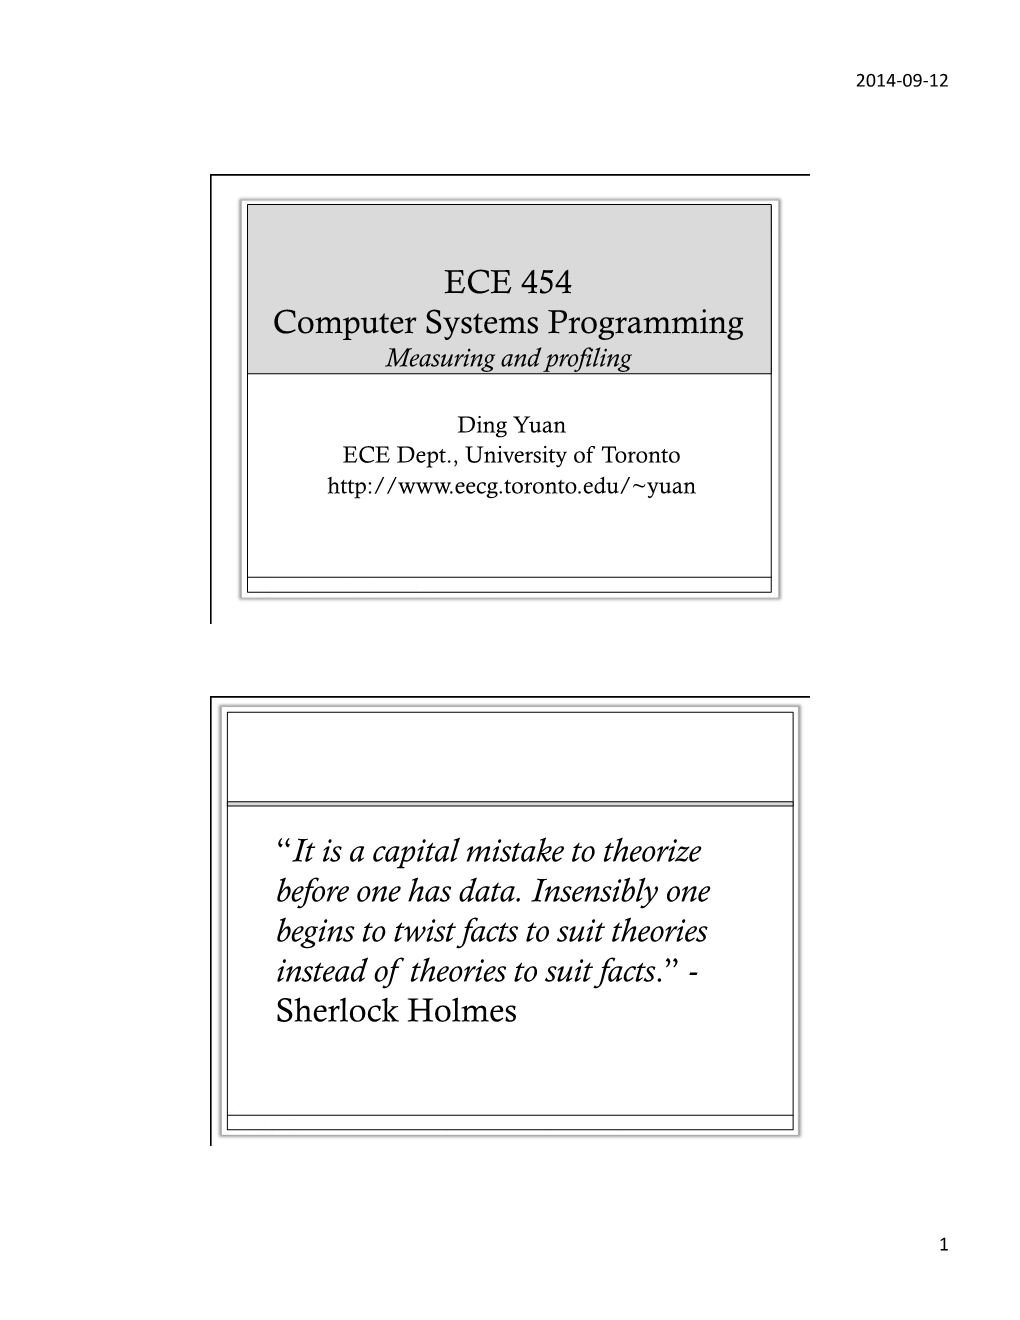 ECE 454 Computer Systems Programming Measuring and Profiling